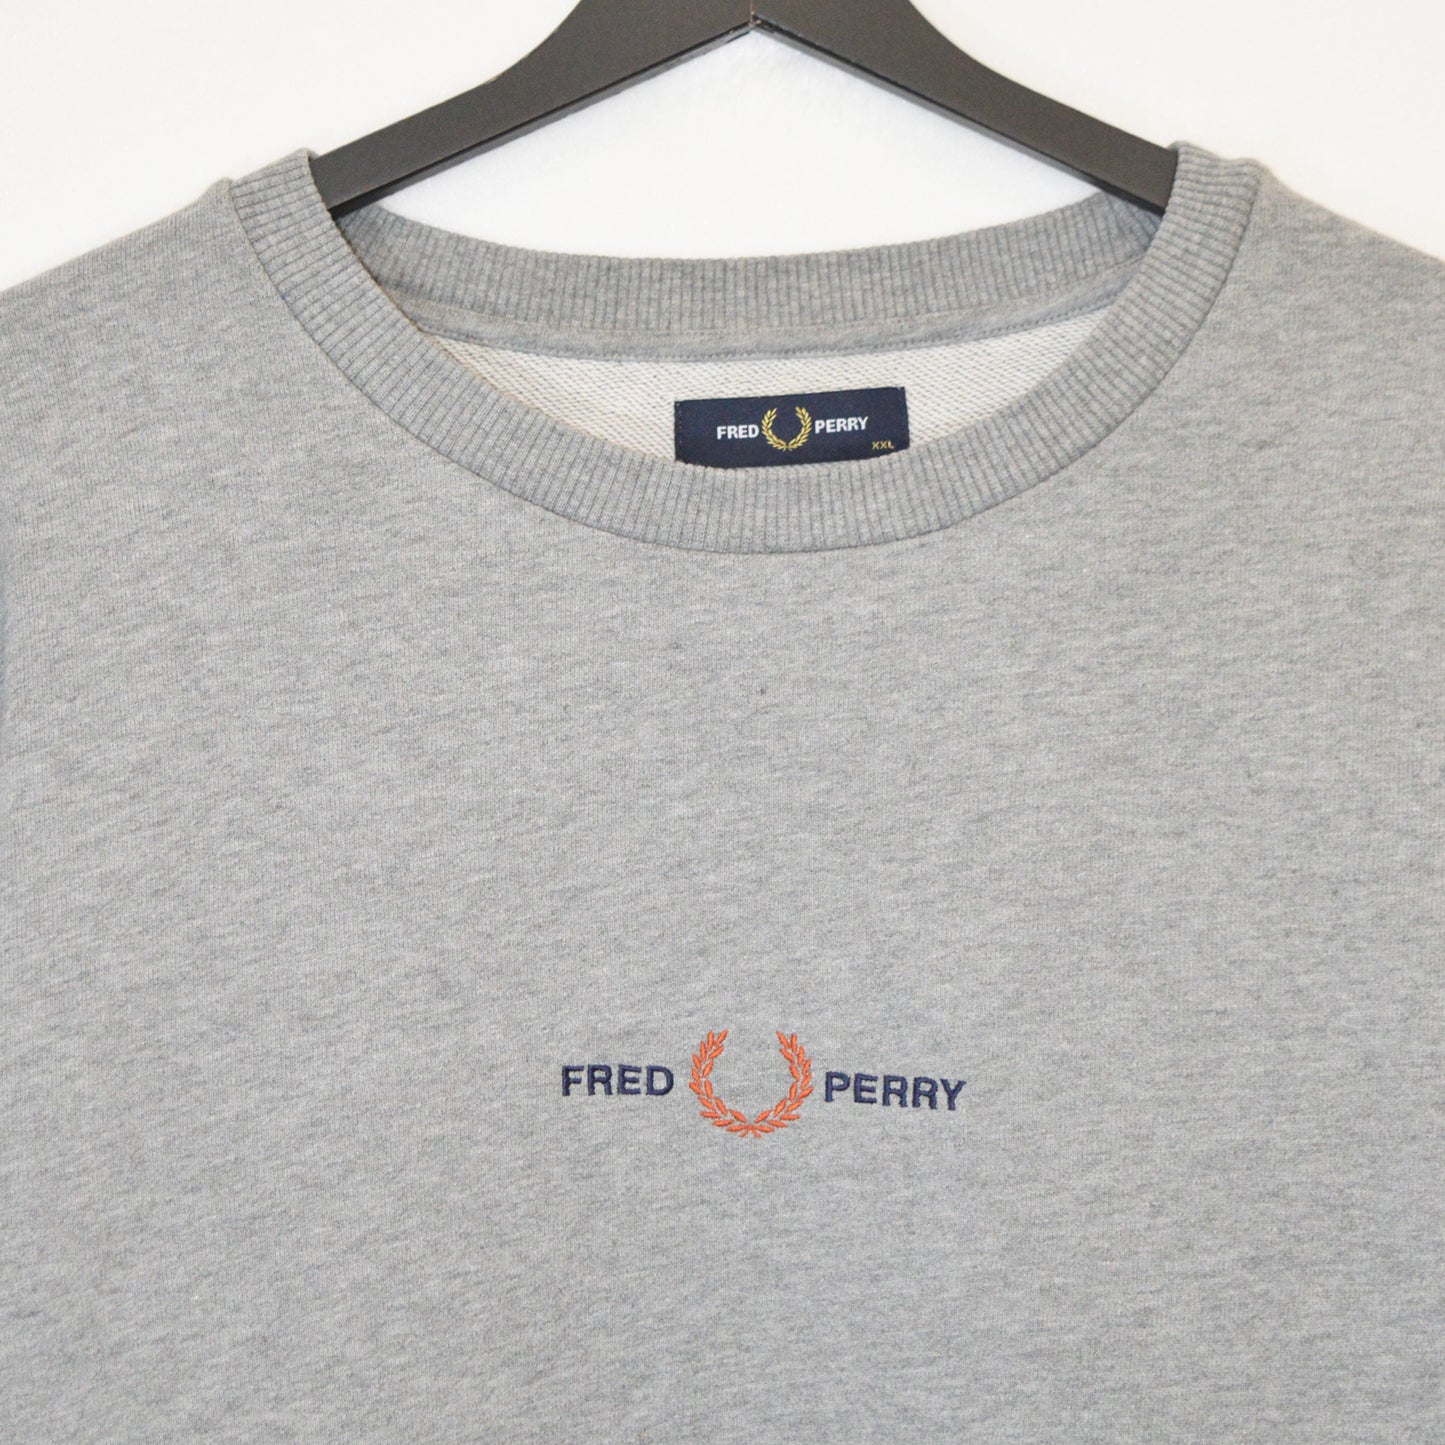 FRED PERRY ГОРНИЩЕ (L)